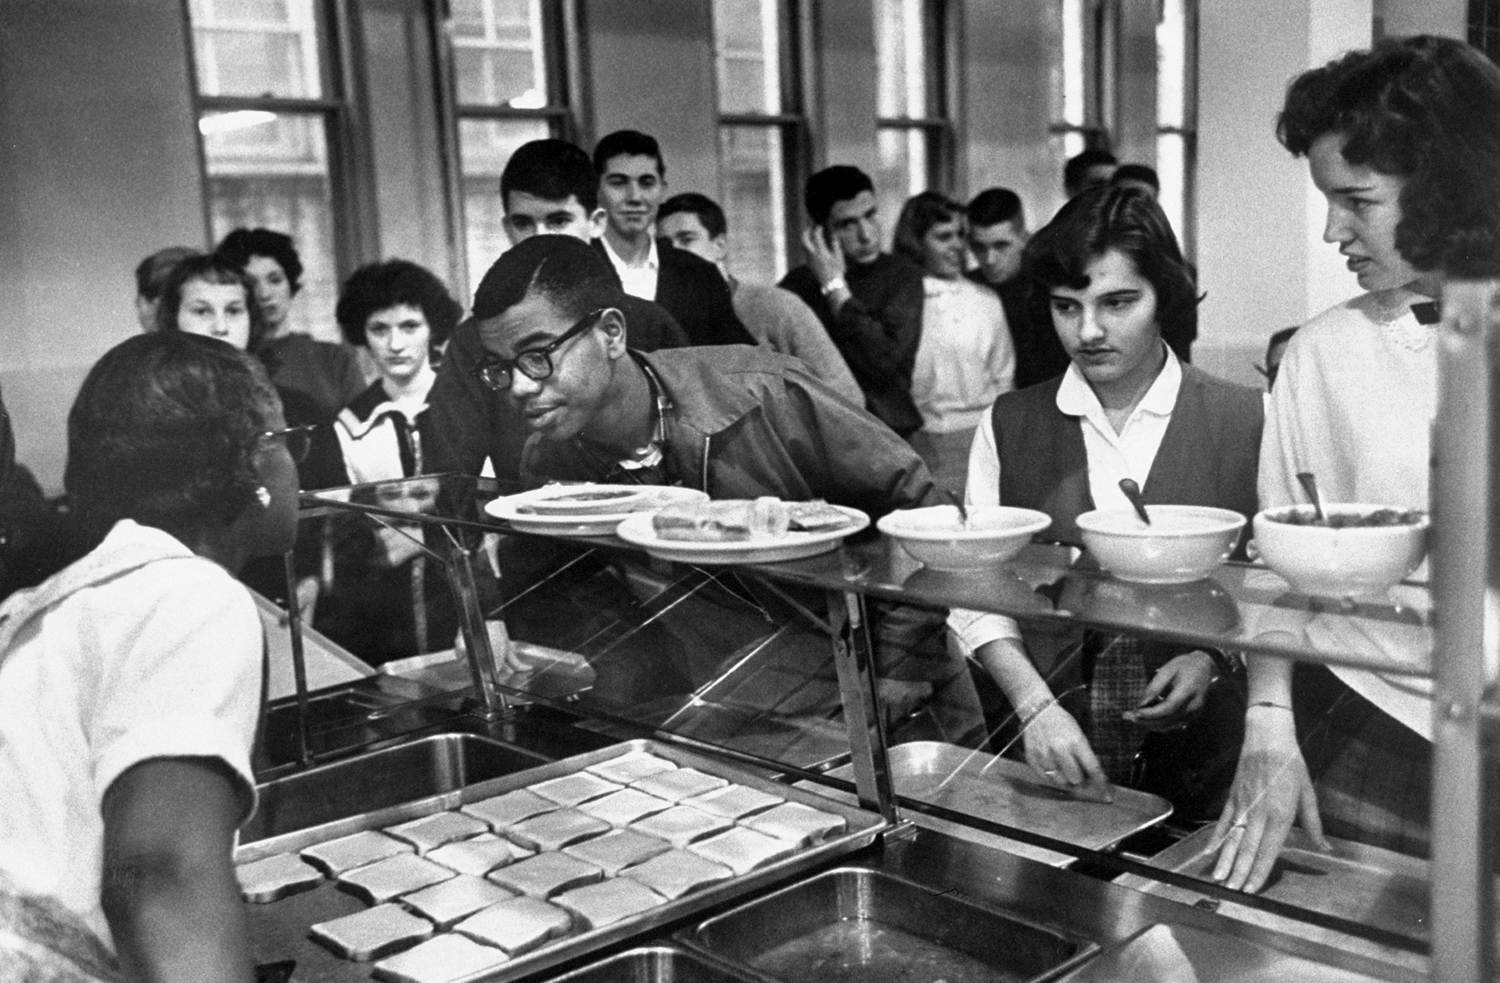 Louis Cousins orders lunch in cafeteria at newly desegregated Maury high school, Norfolk, Va., 1959.